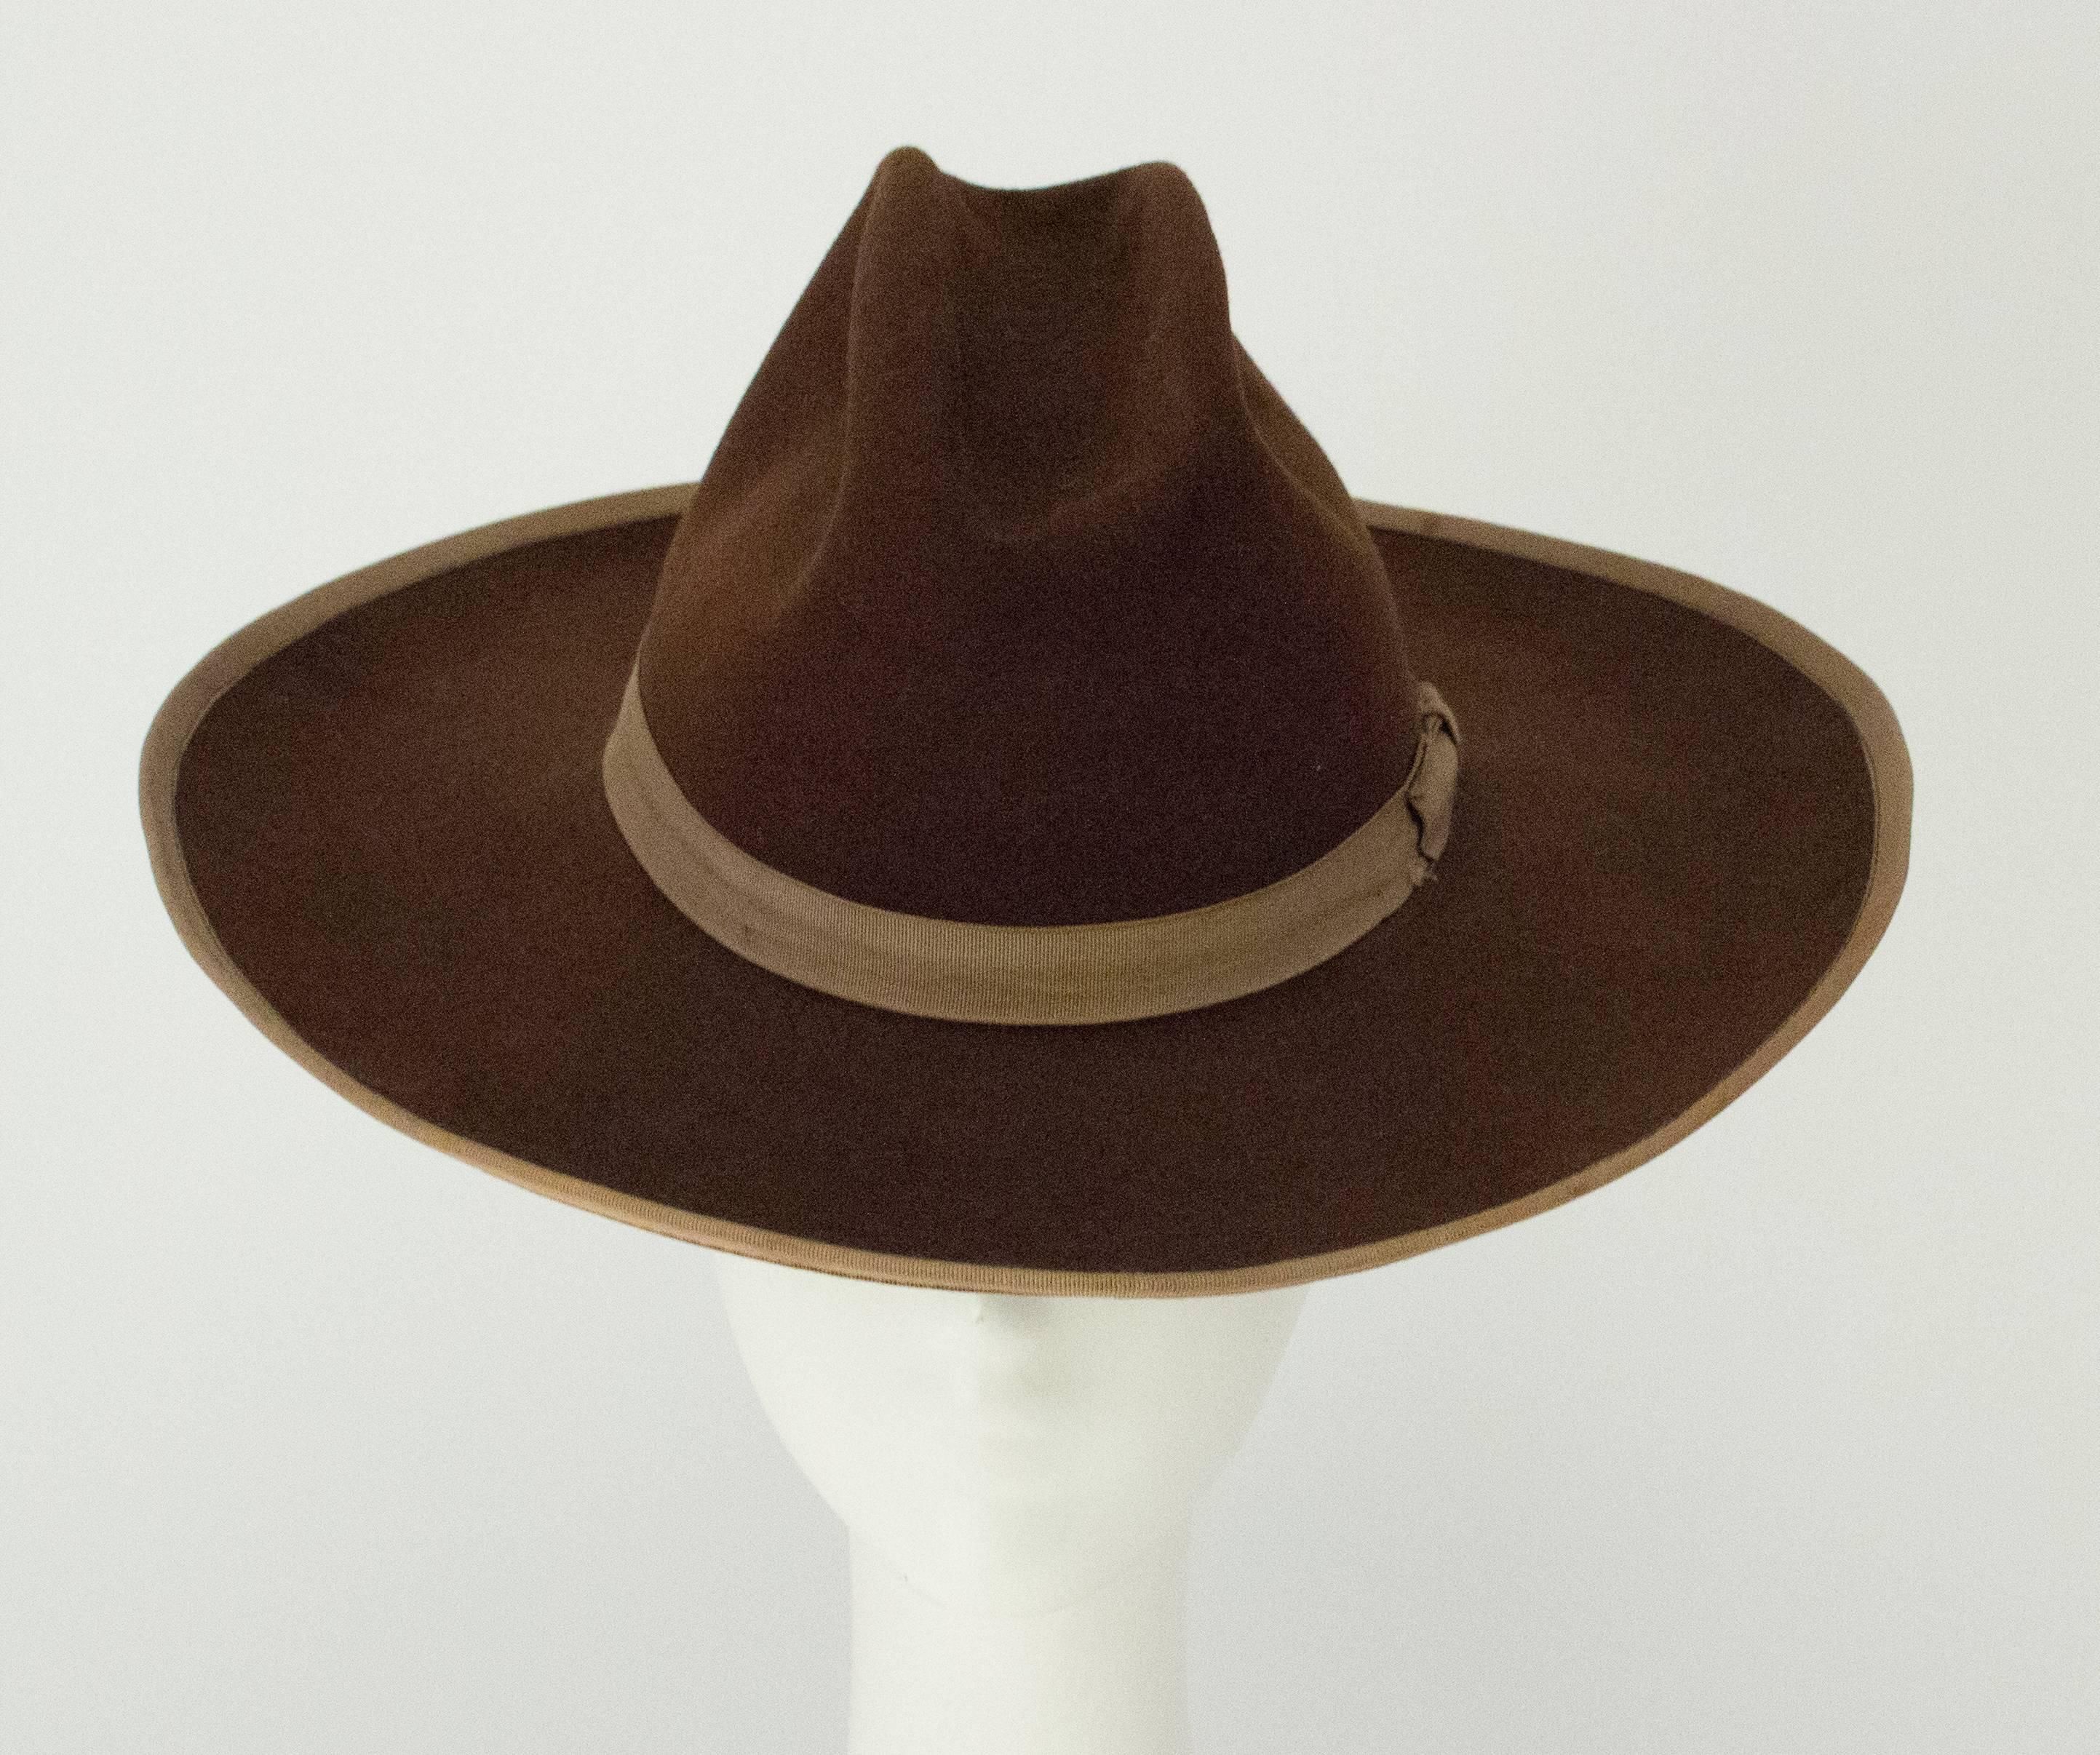 40s Brown Felt Cowboy Hat with Tan Grosgrain Ribbon Trim & Band. Leather interior band. 

Measurements:
Interior circumference: 21 inches 
Brim: Approx. 4 inches wide 
Height: Approx. 5 inches 